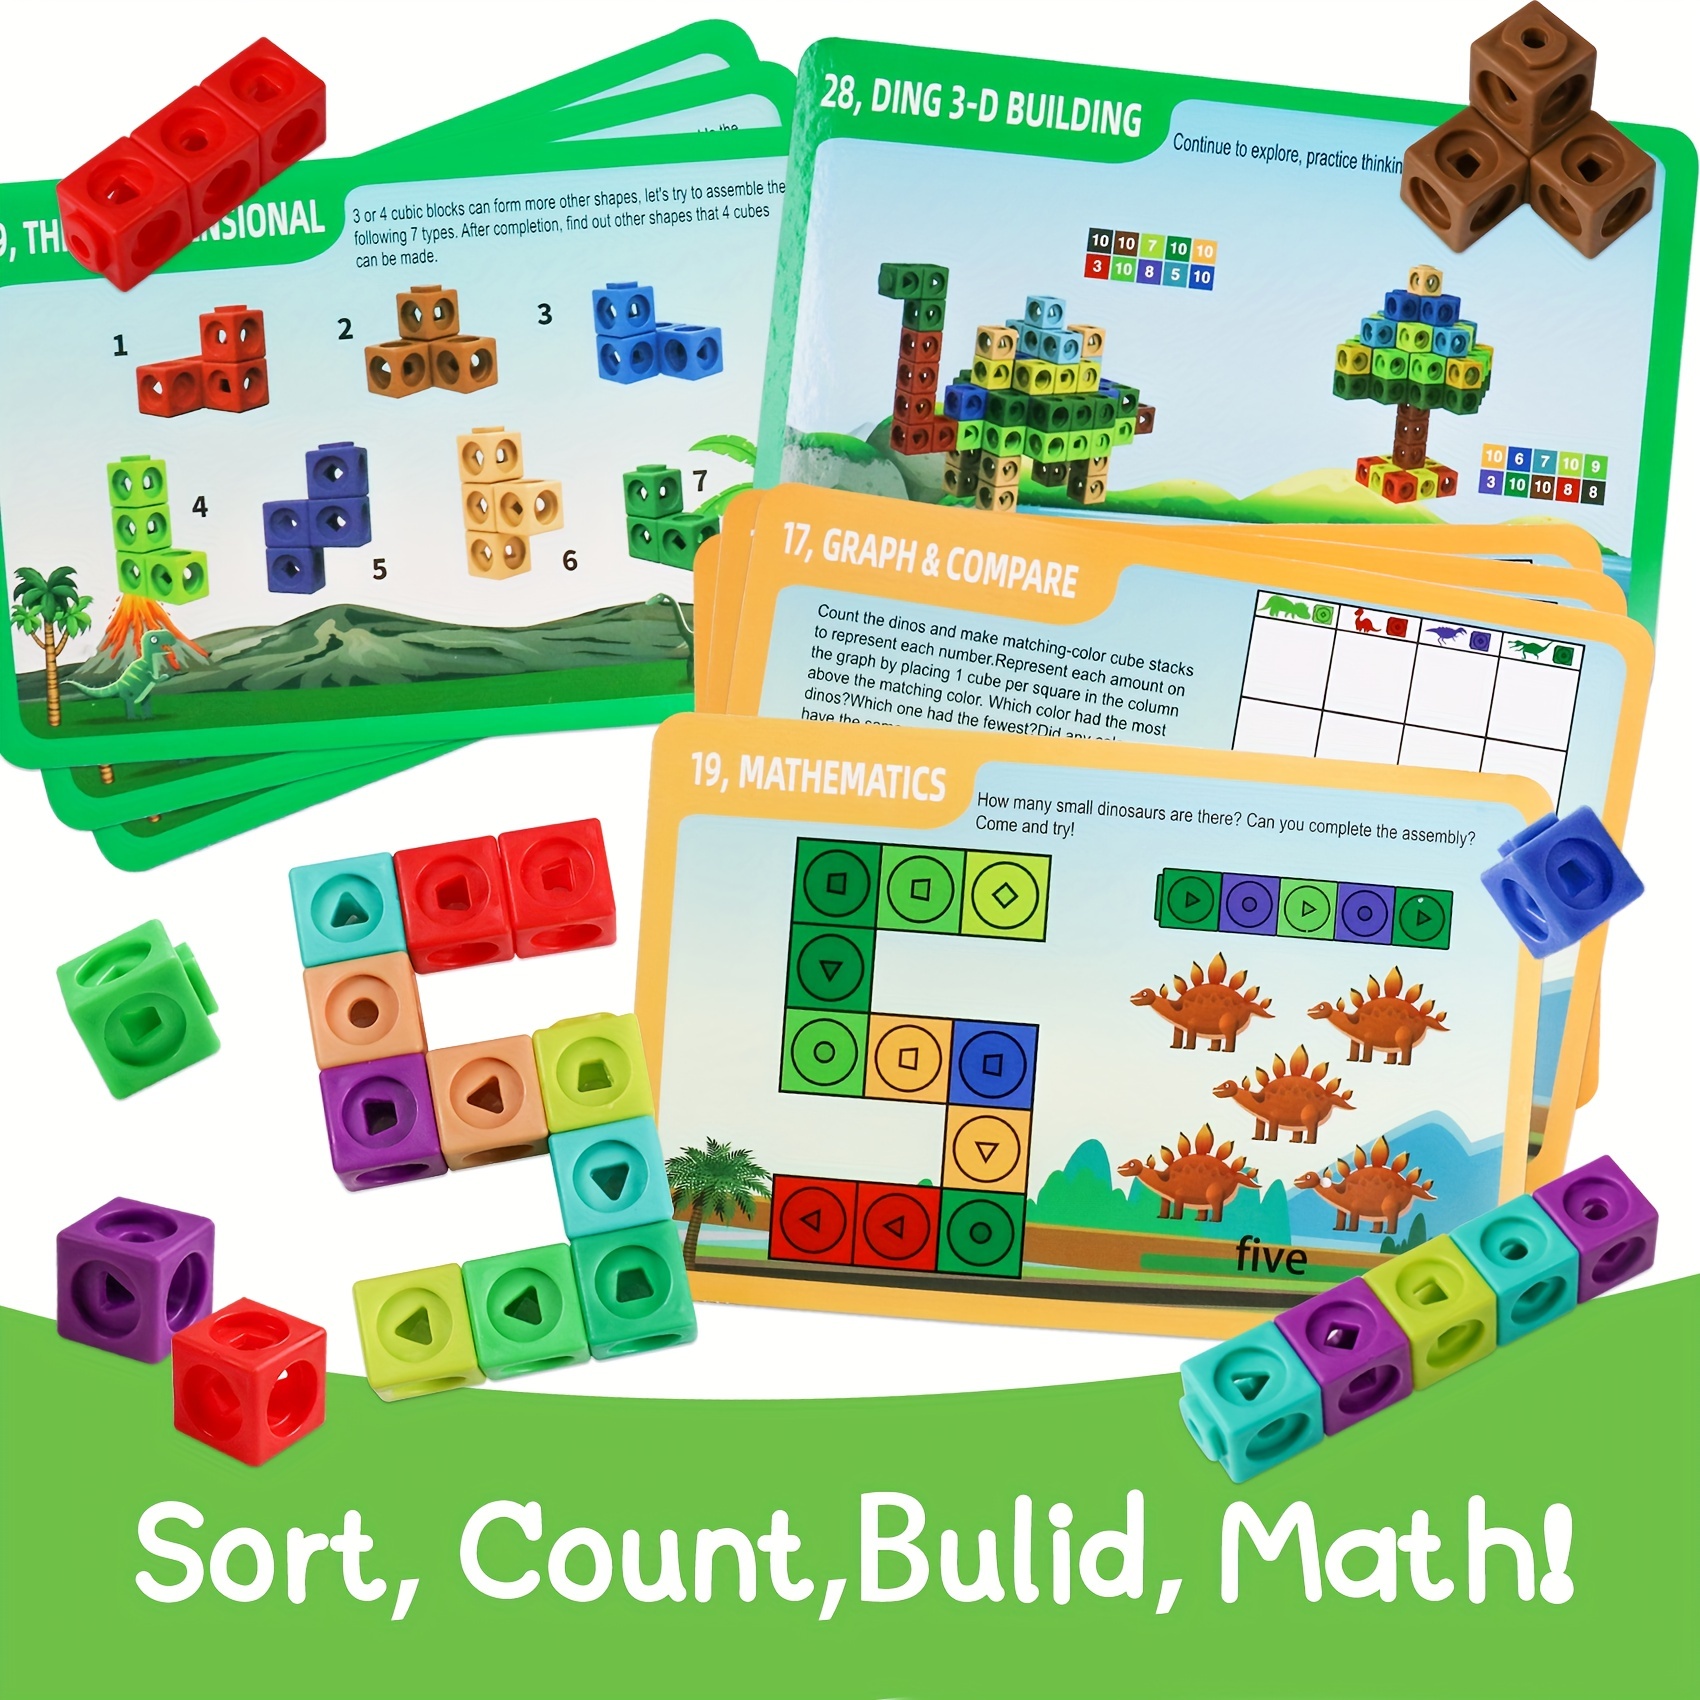 Learning Resources Snap Cubes - 100pc